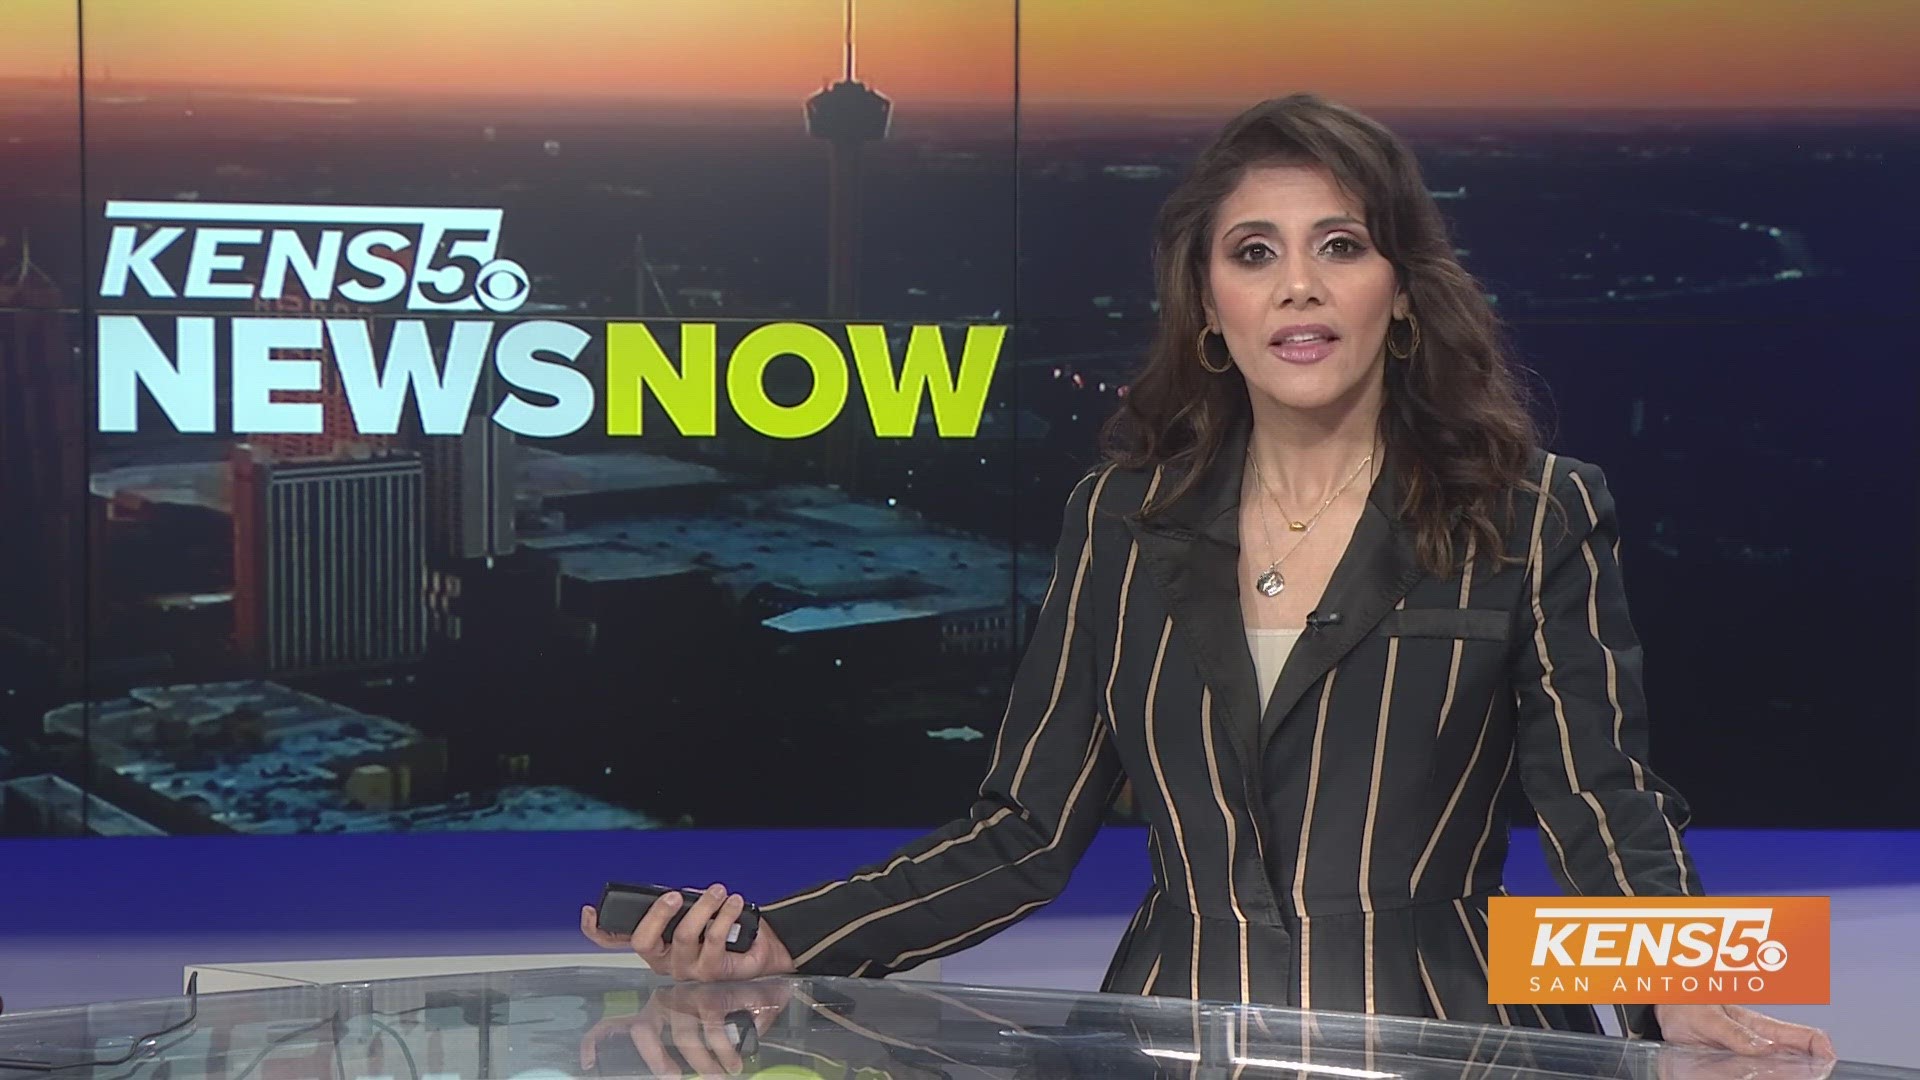 Follow us here to get the latest top headlines with KENS 5 anchor Sarah Forgany every weekday on KENS 5!